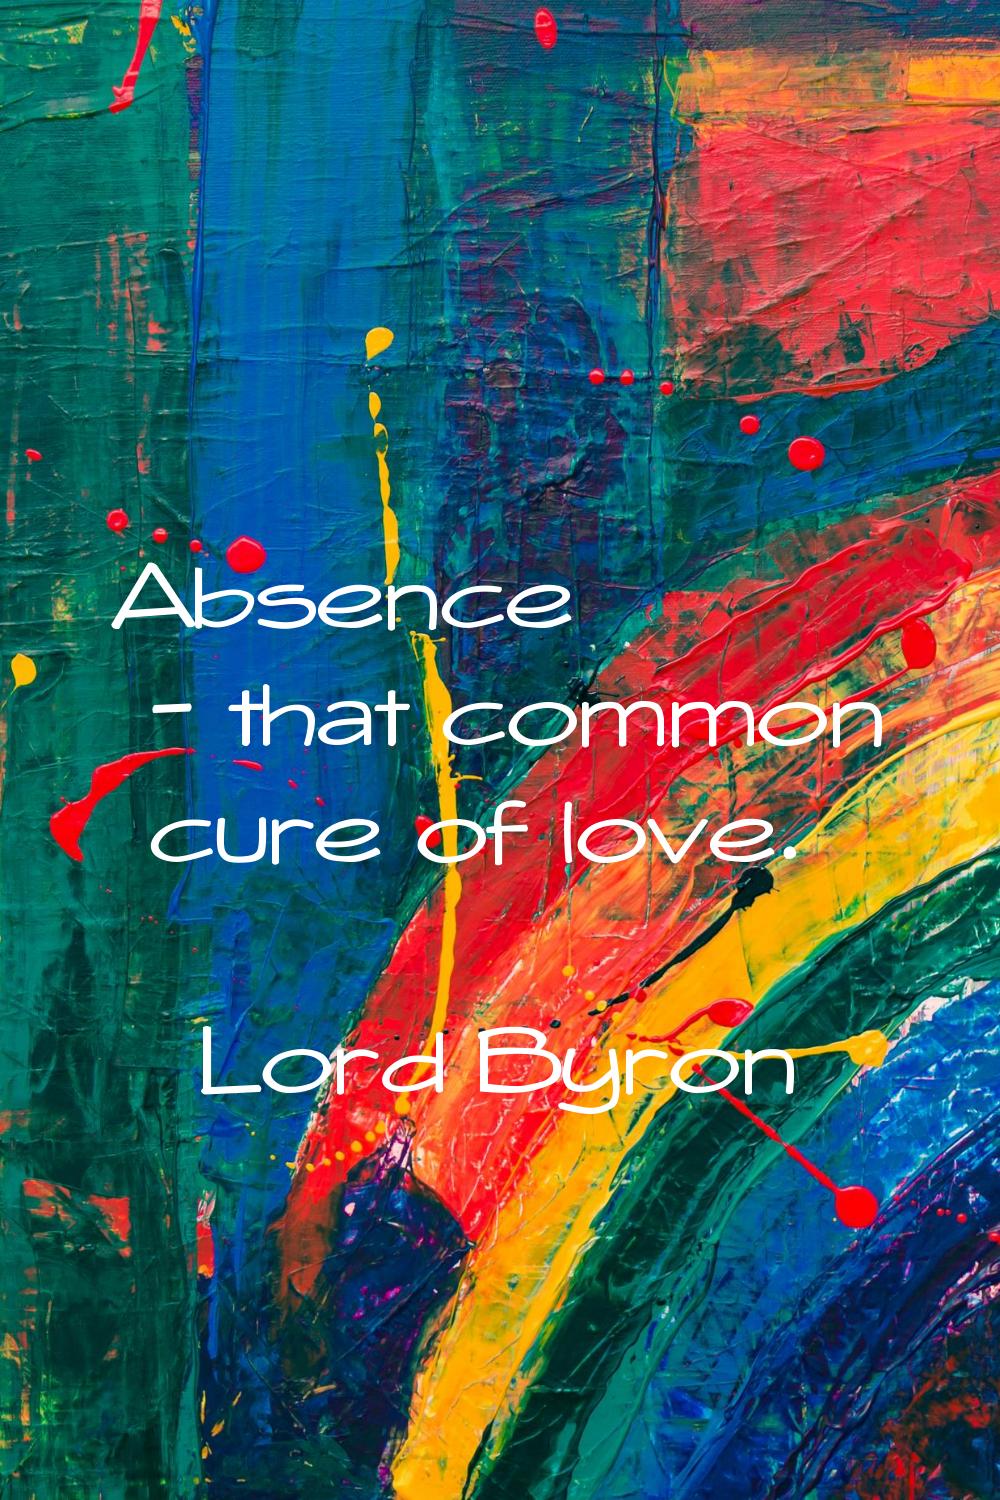 Absence - that common cure of love.